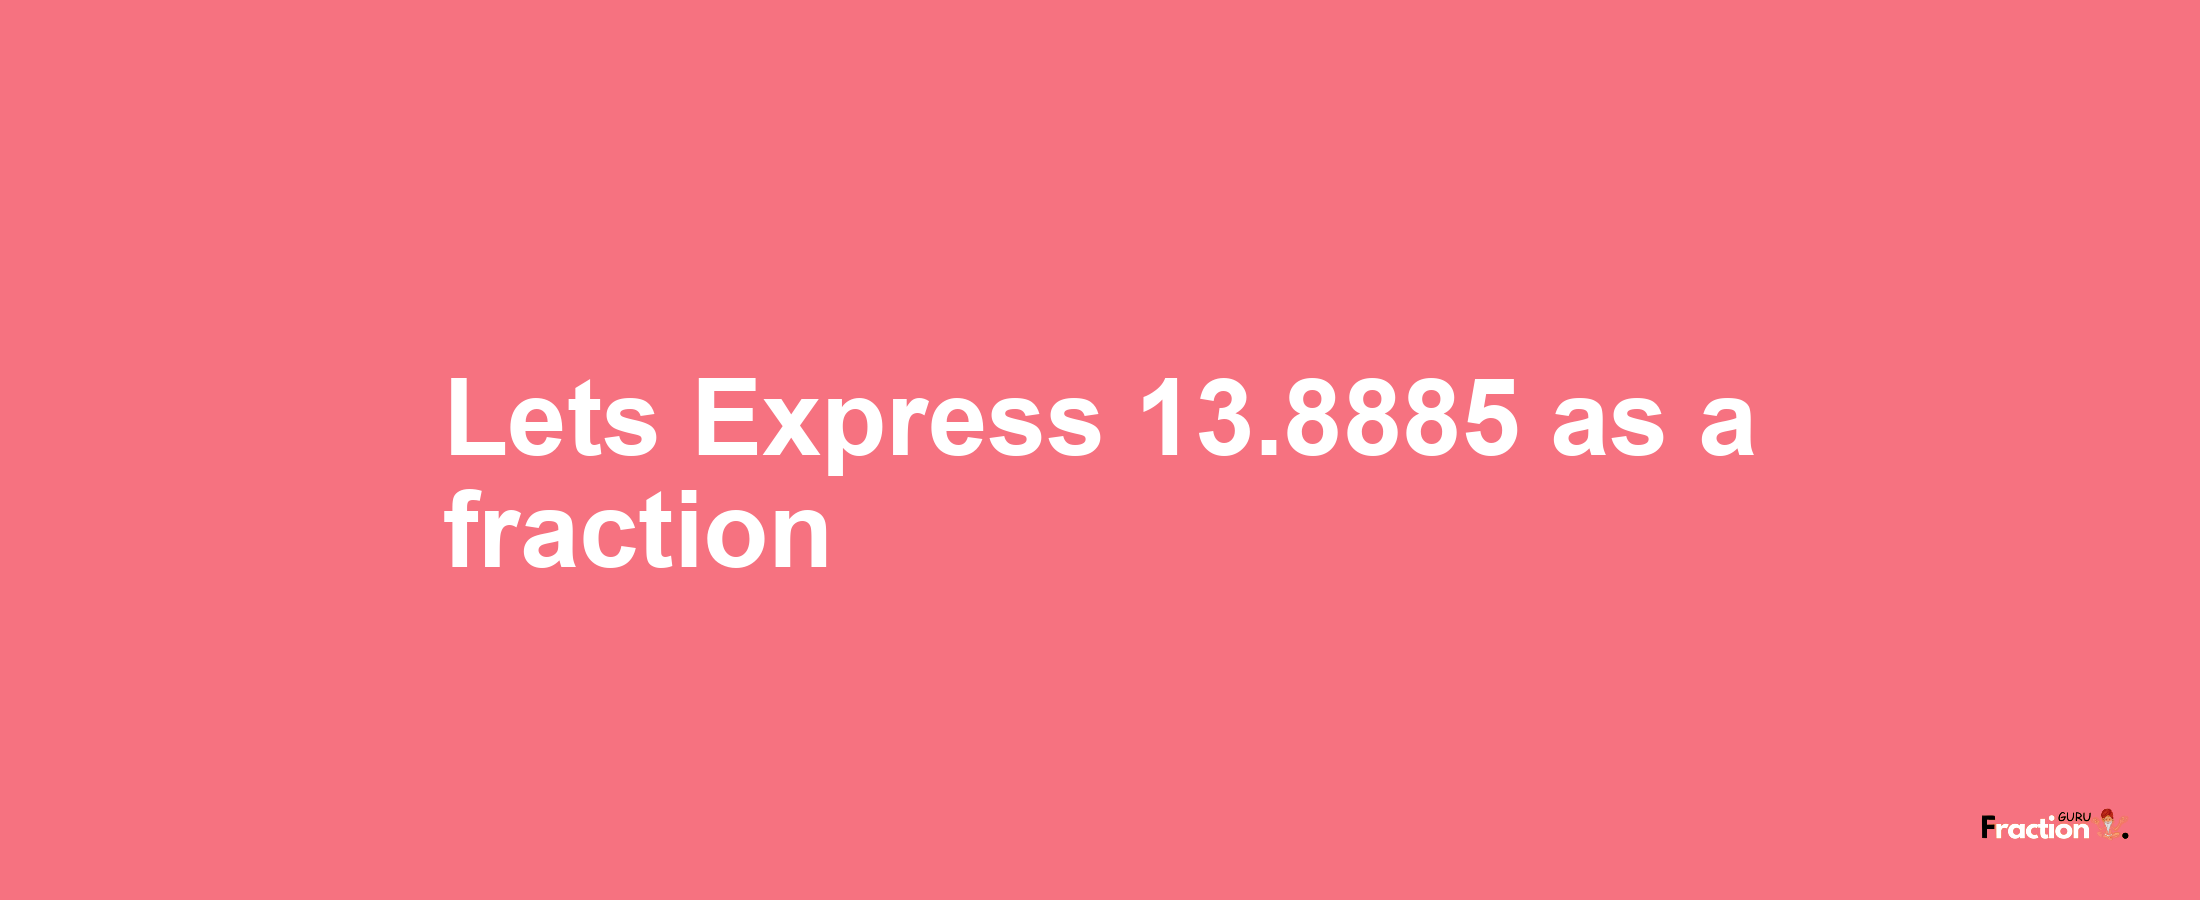 Lets Express 13.8885 as afraction